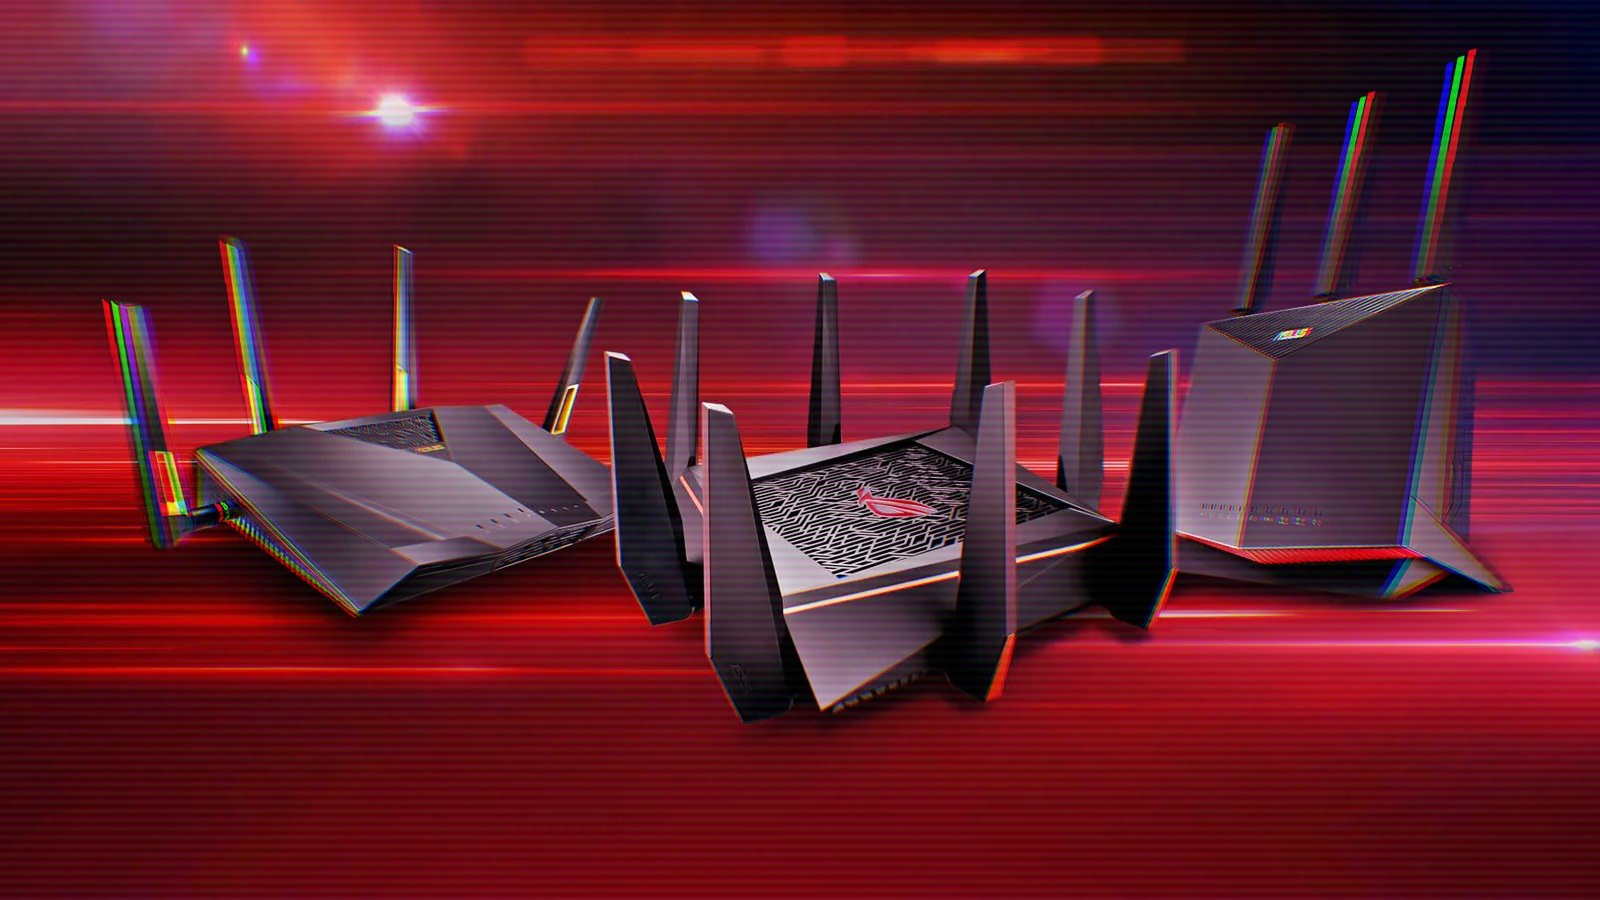 ASUS Releases Patches to Fix Critical Security Bugs Impacting Multiple Router Models